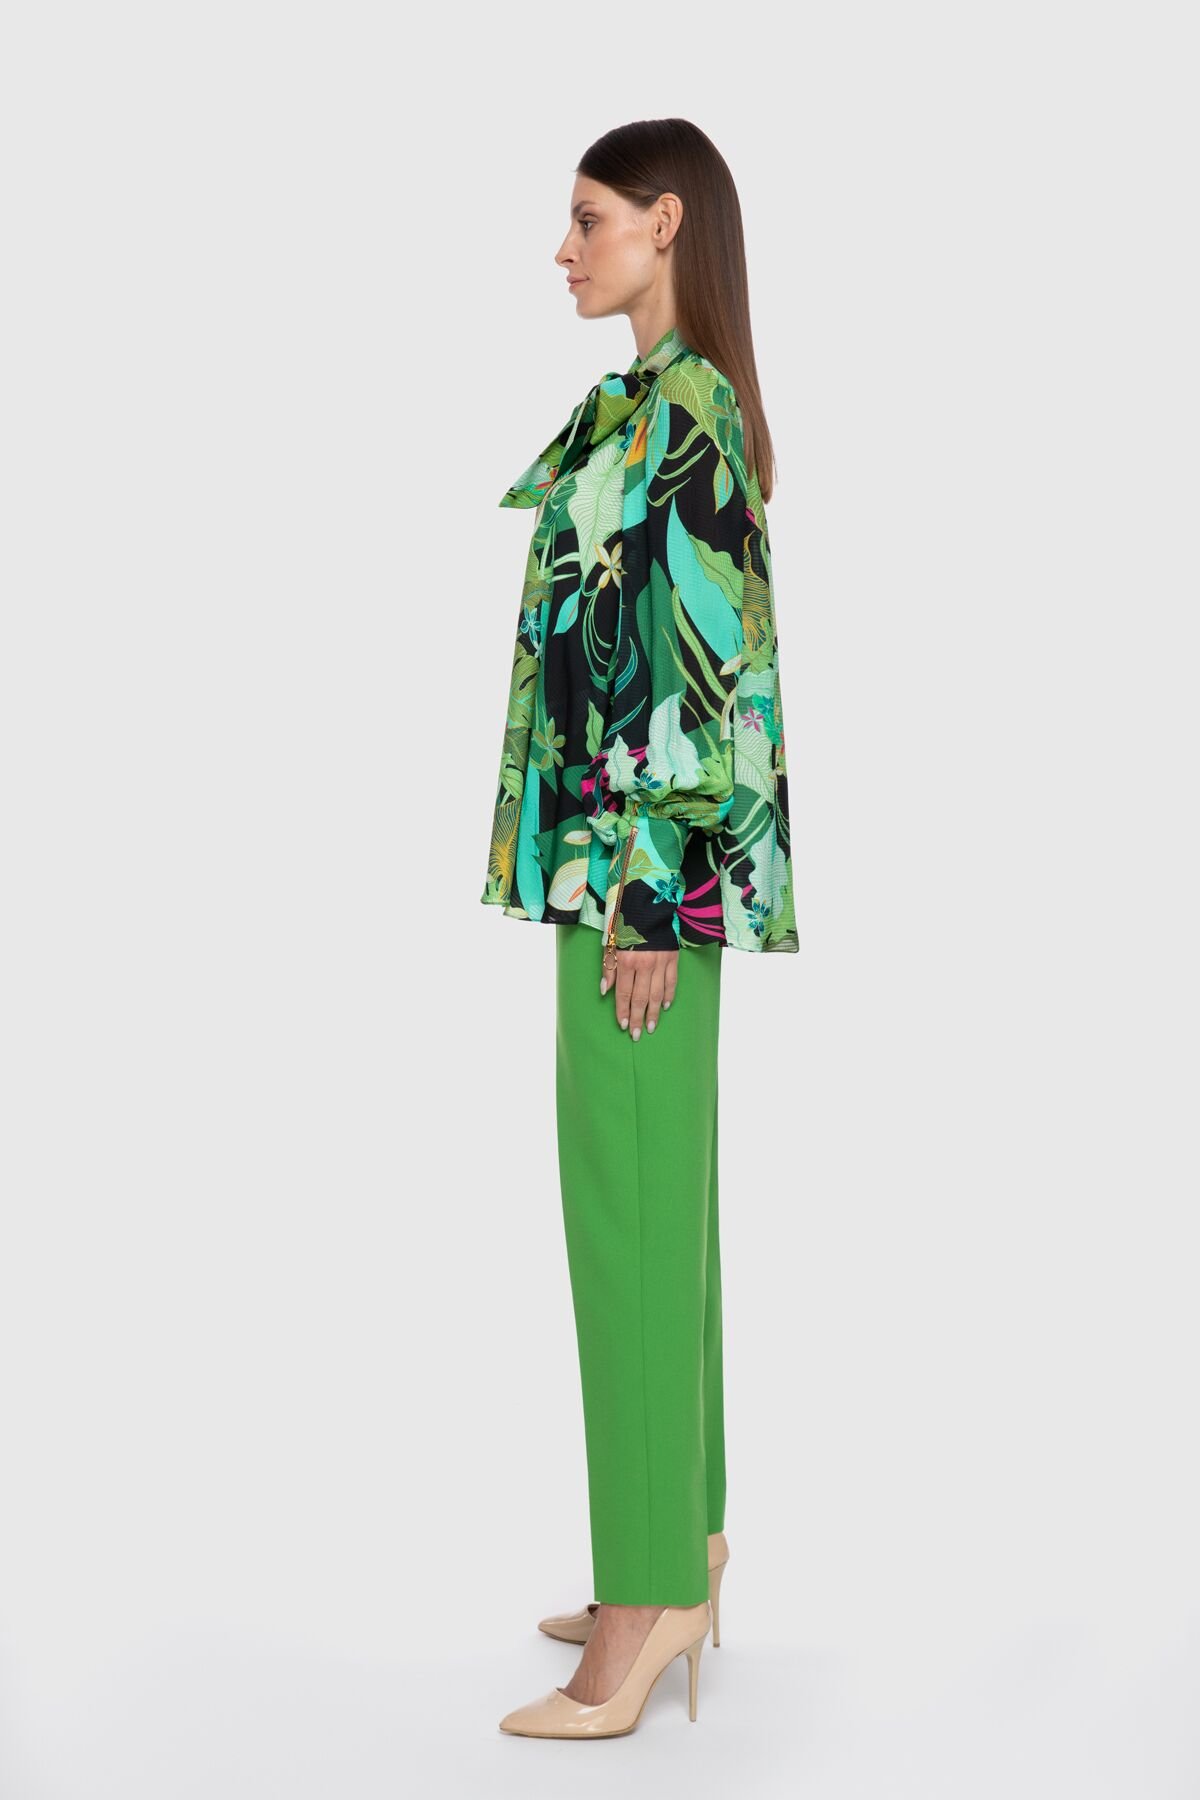 Tie Collar Patterned Green Blouse